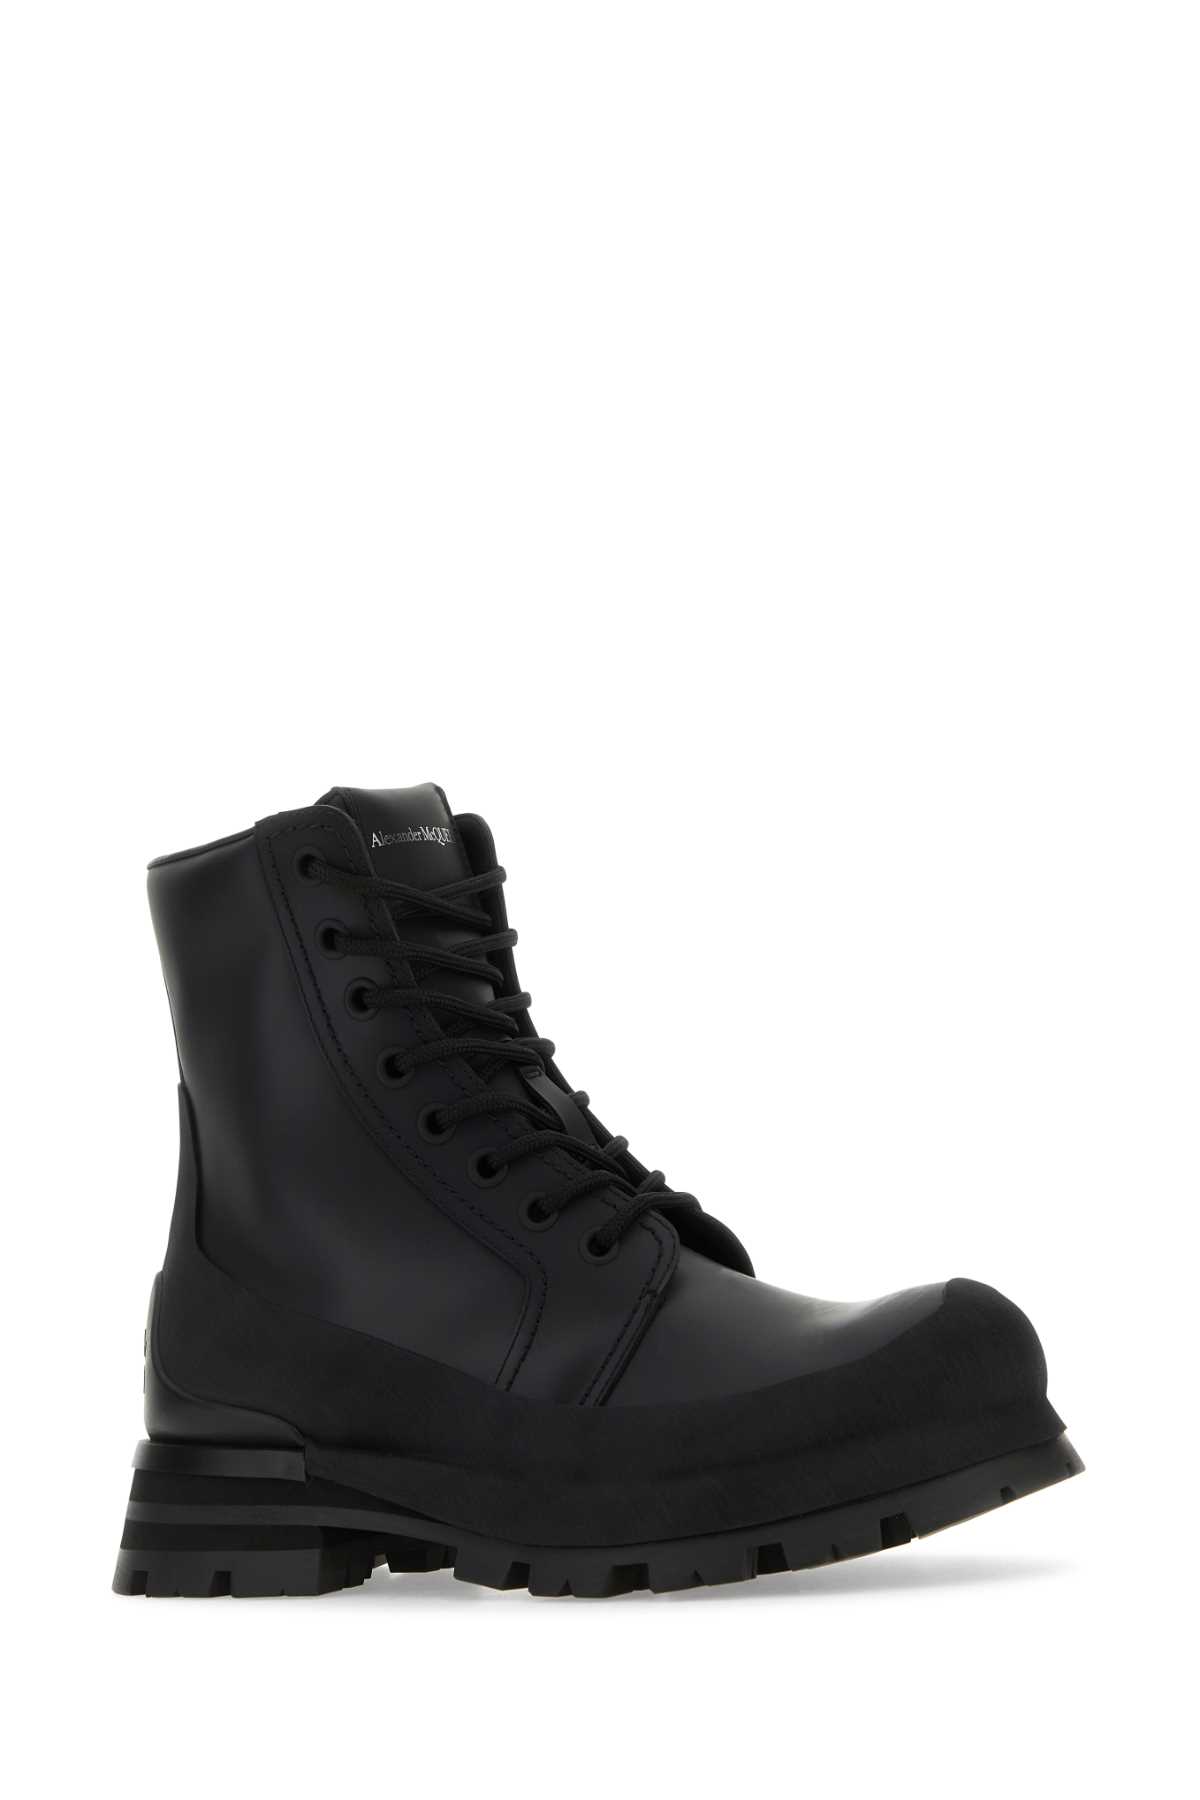 ALEXANDER MCQUEEN BLACK LEATHER WANDER ANKLE BOOTS